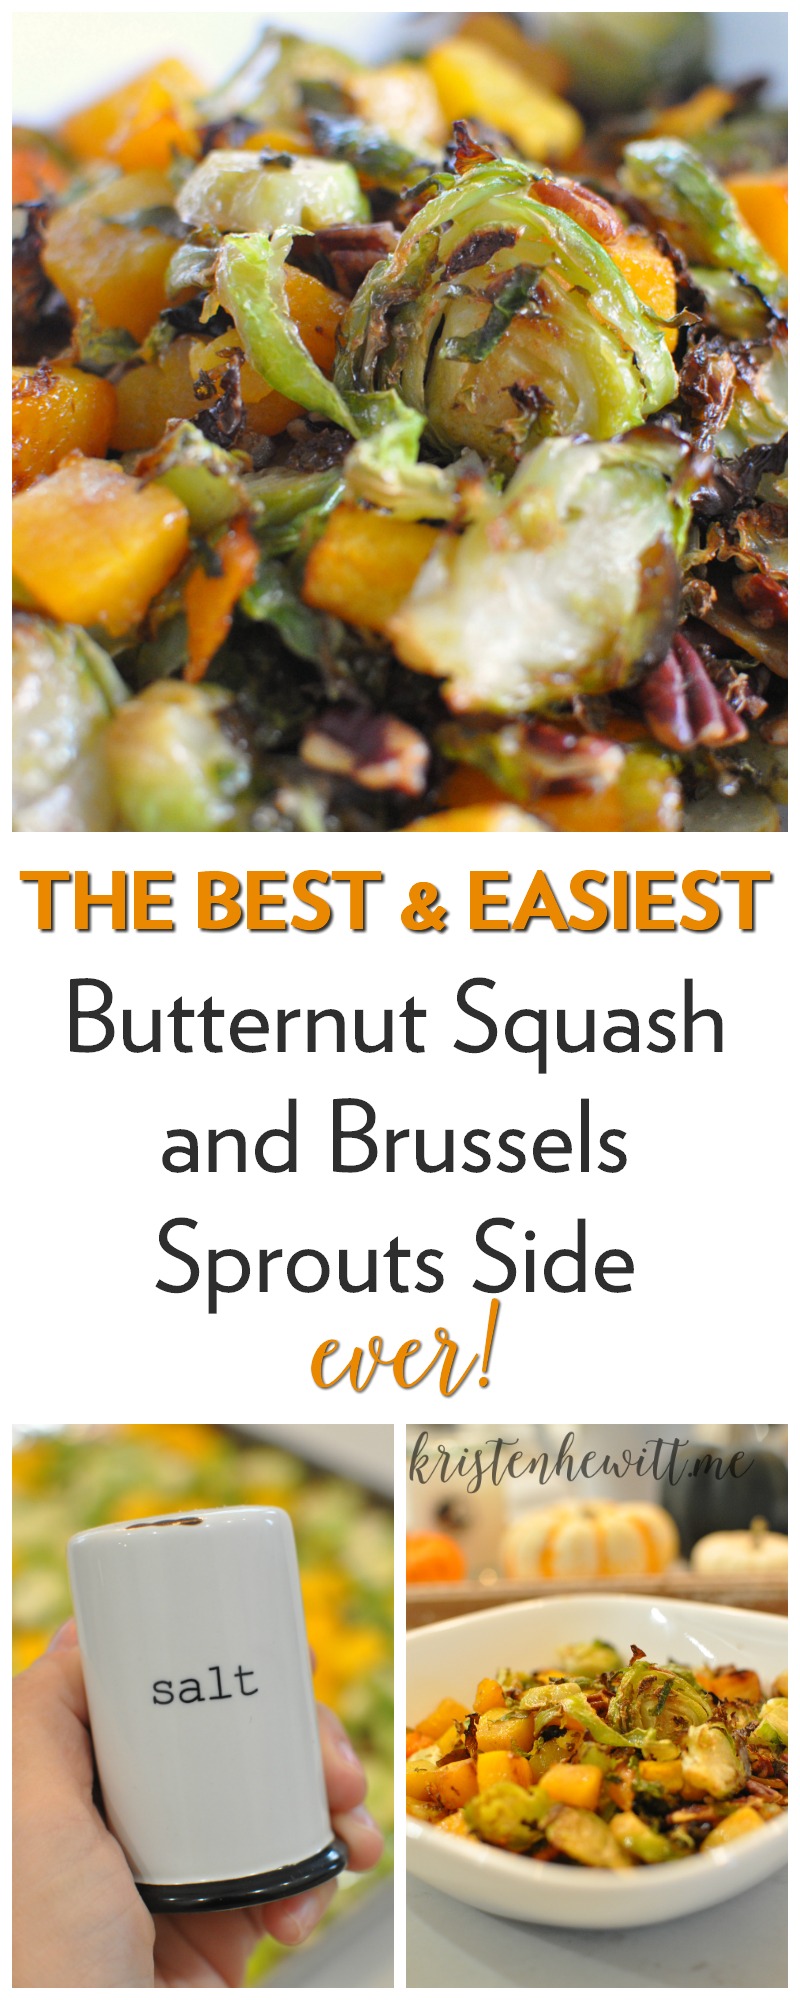 Looking for a new side or meal that is filling, simple and DELISH? Seriously, this is the easiest and best butternut squash and brussels sprouts side ever!